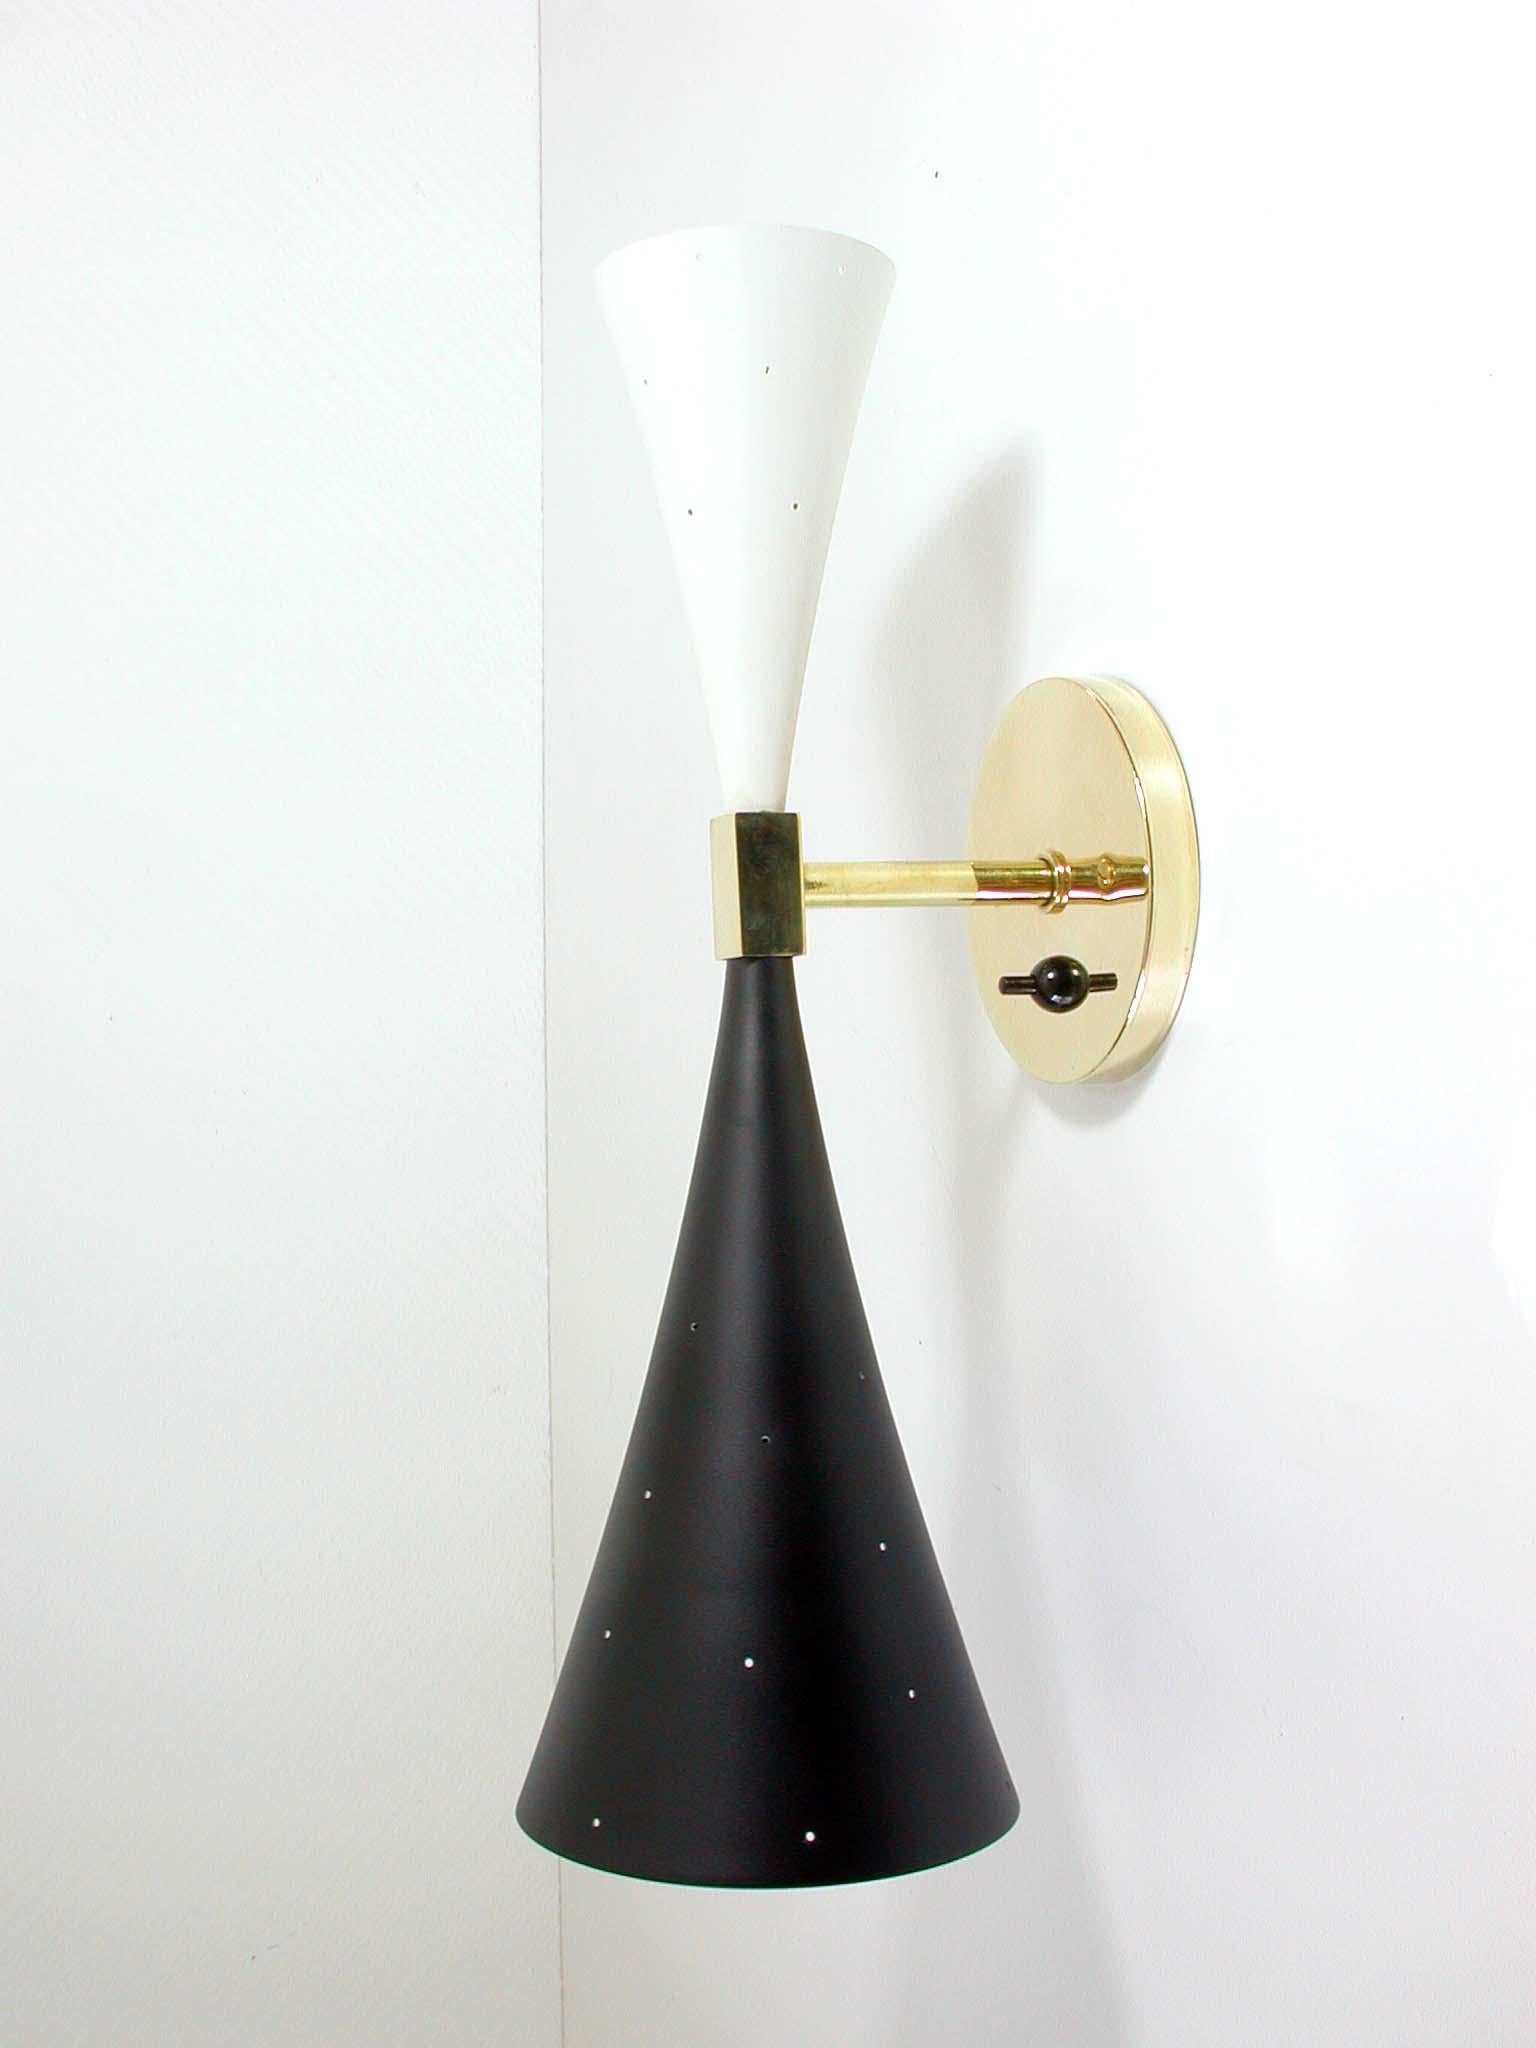 This large Modernist 1950s double cone wall light was designed and manufactured in the United States.

The wall light has got a black and a white diabolo-shaped perforated lampshade with brass lamp rod and brass backplate (diameter 4.5 inches /